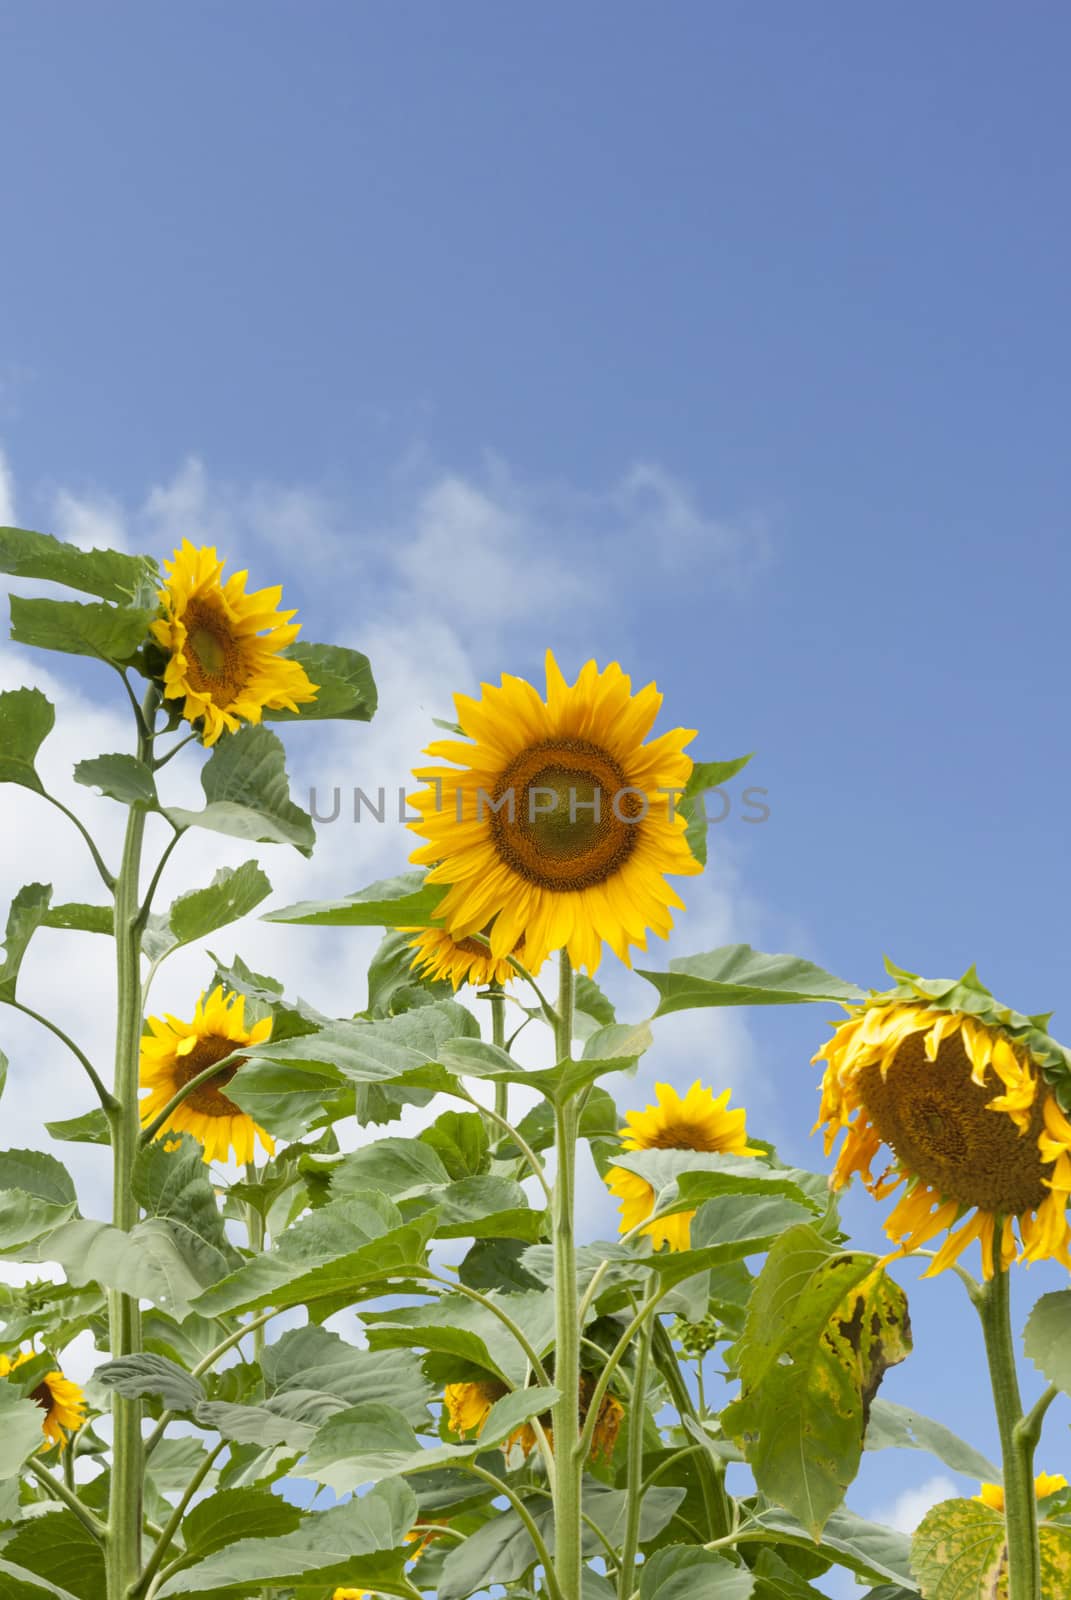 Agricultural crop of sunflowers growing in Poland.